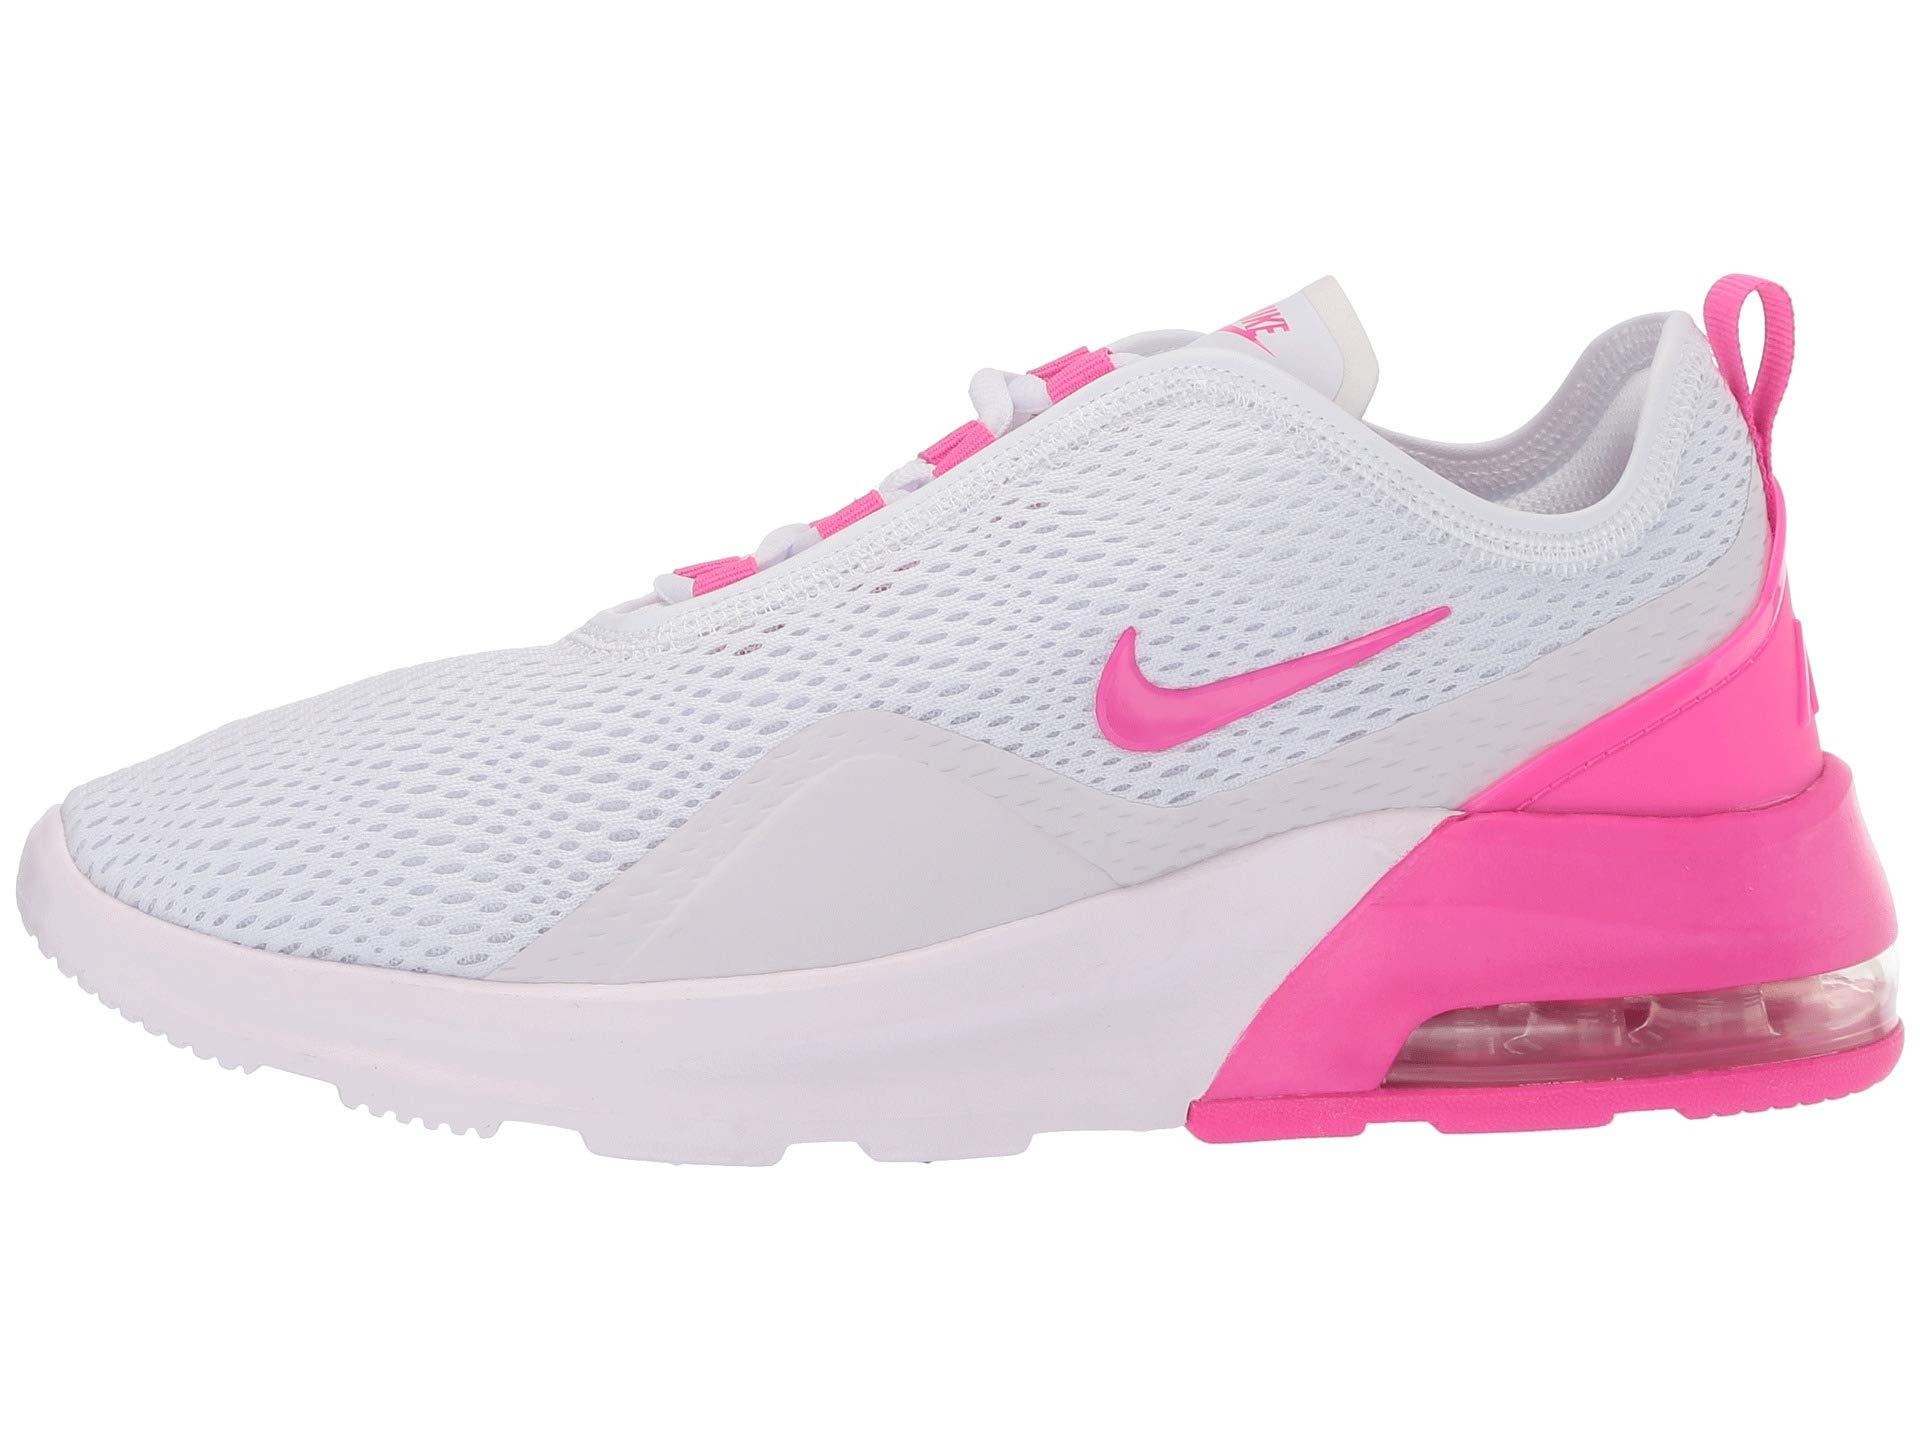 Nike Rubber Air Max Motion 2 Shoes in Pink | Lyst